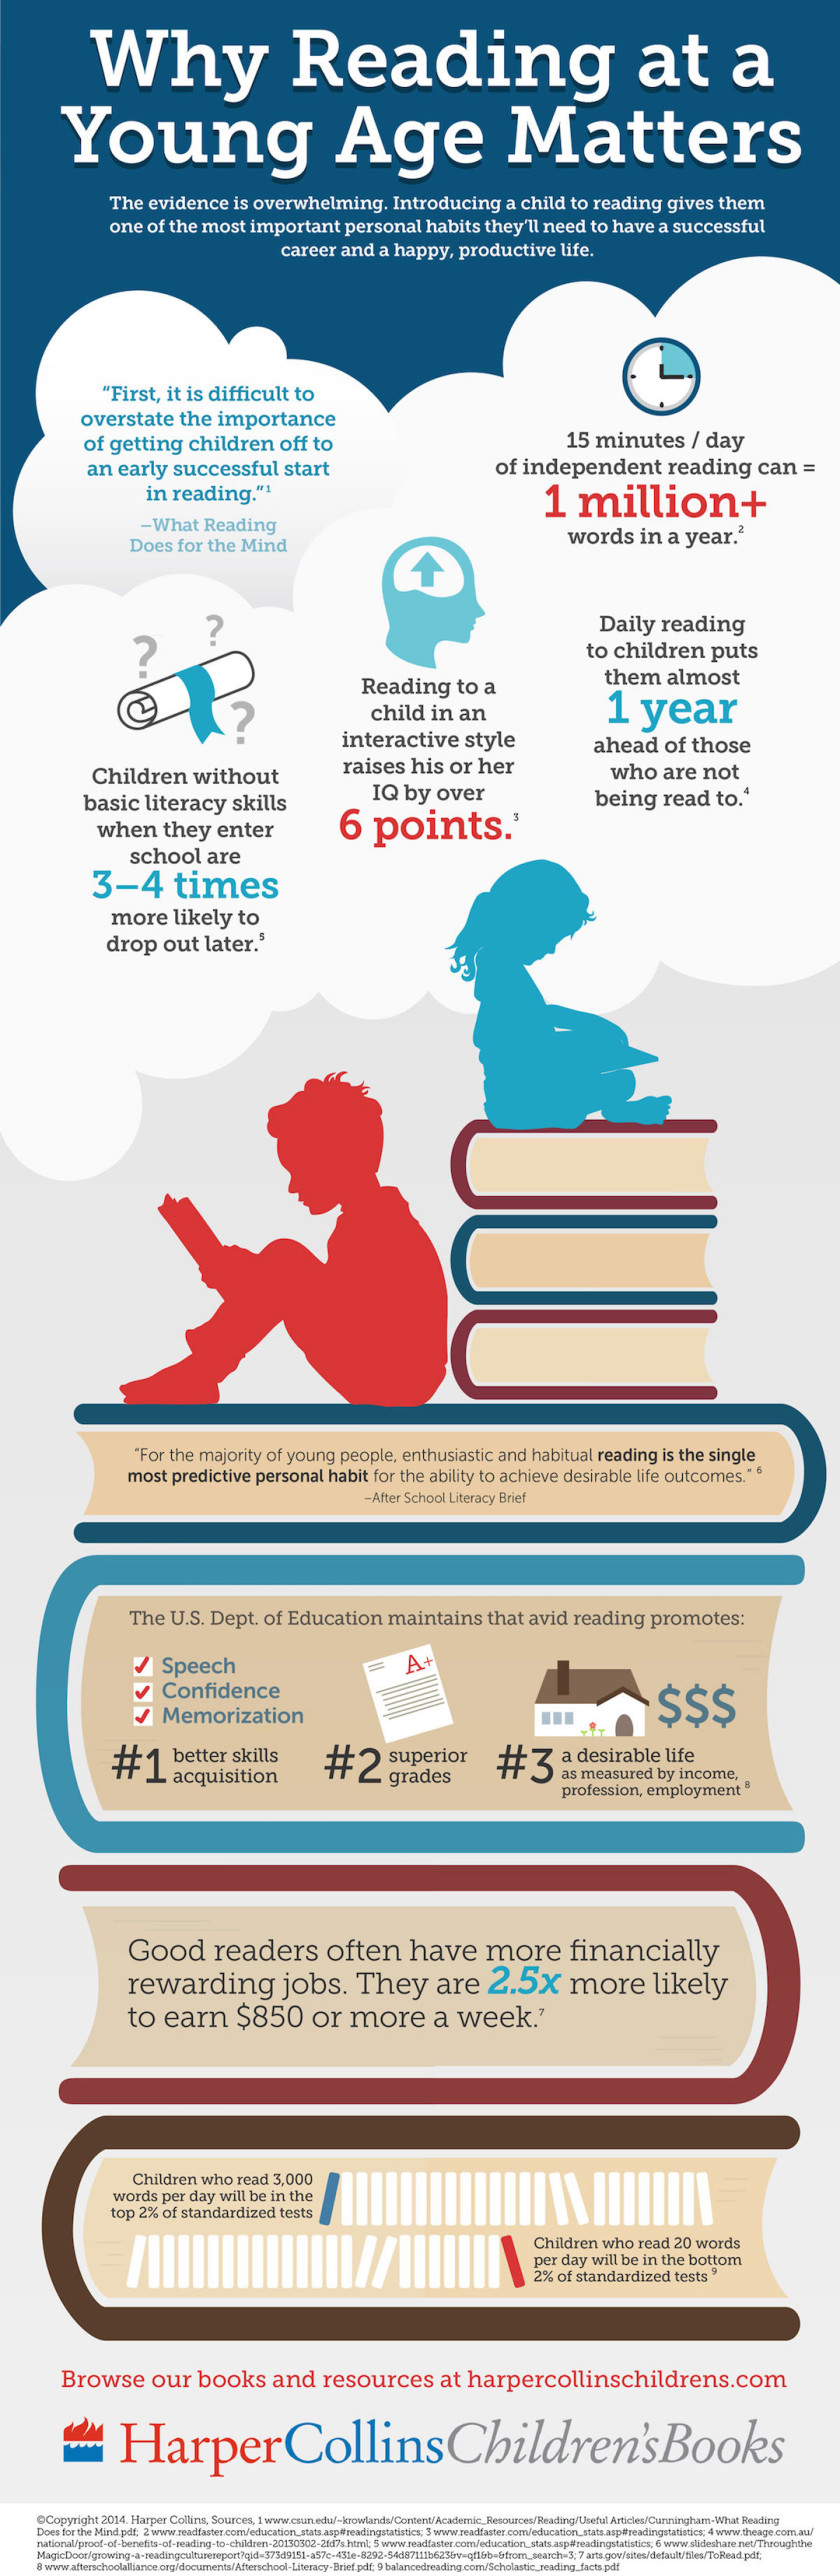 Why Reading at Young Age Matters (Infographic)